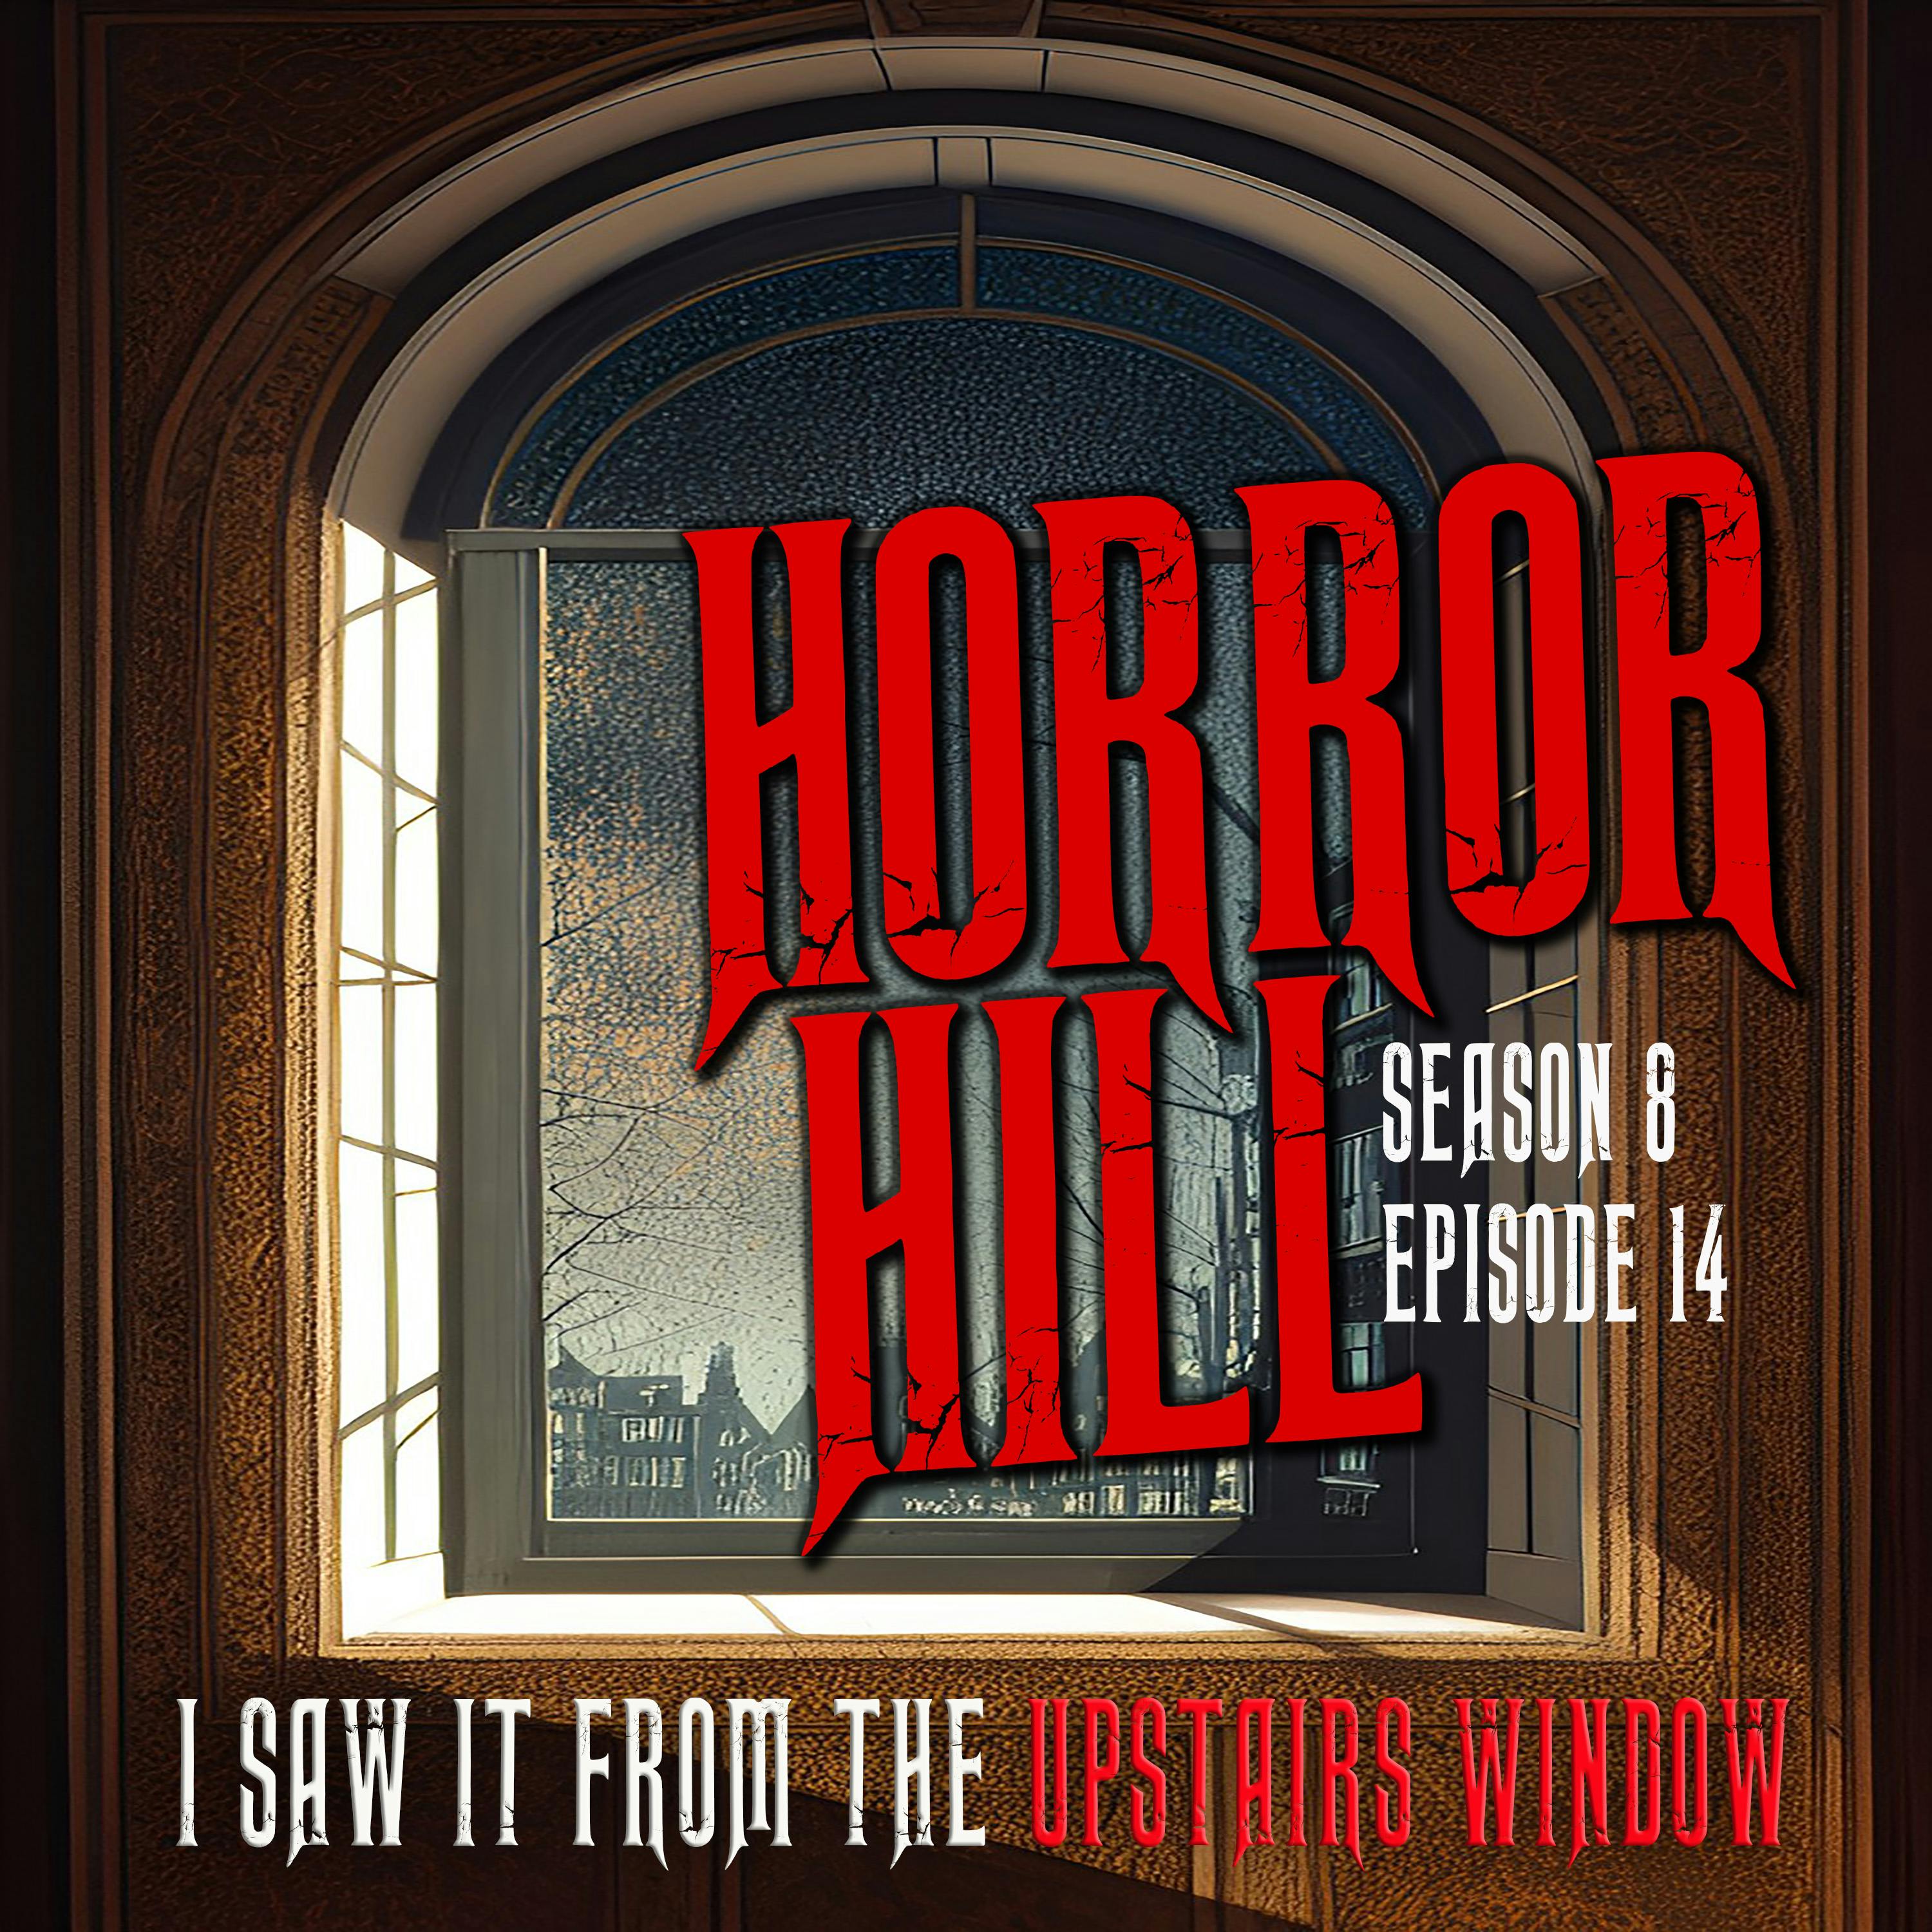 S8E14 - "I Saw it From the Upstairs Window" - Horror Hill